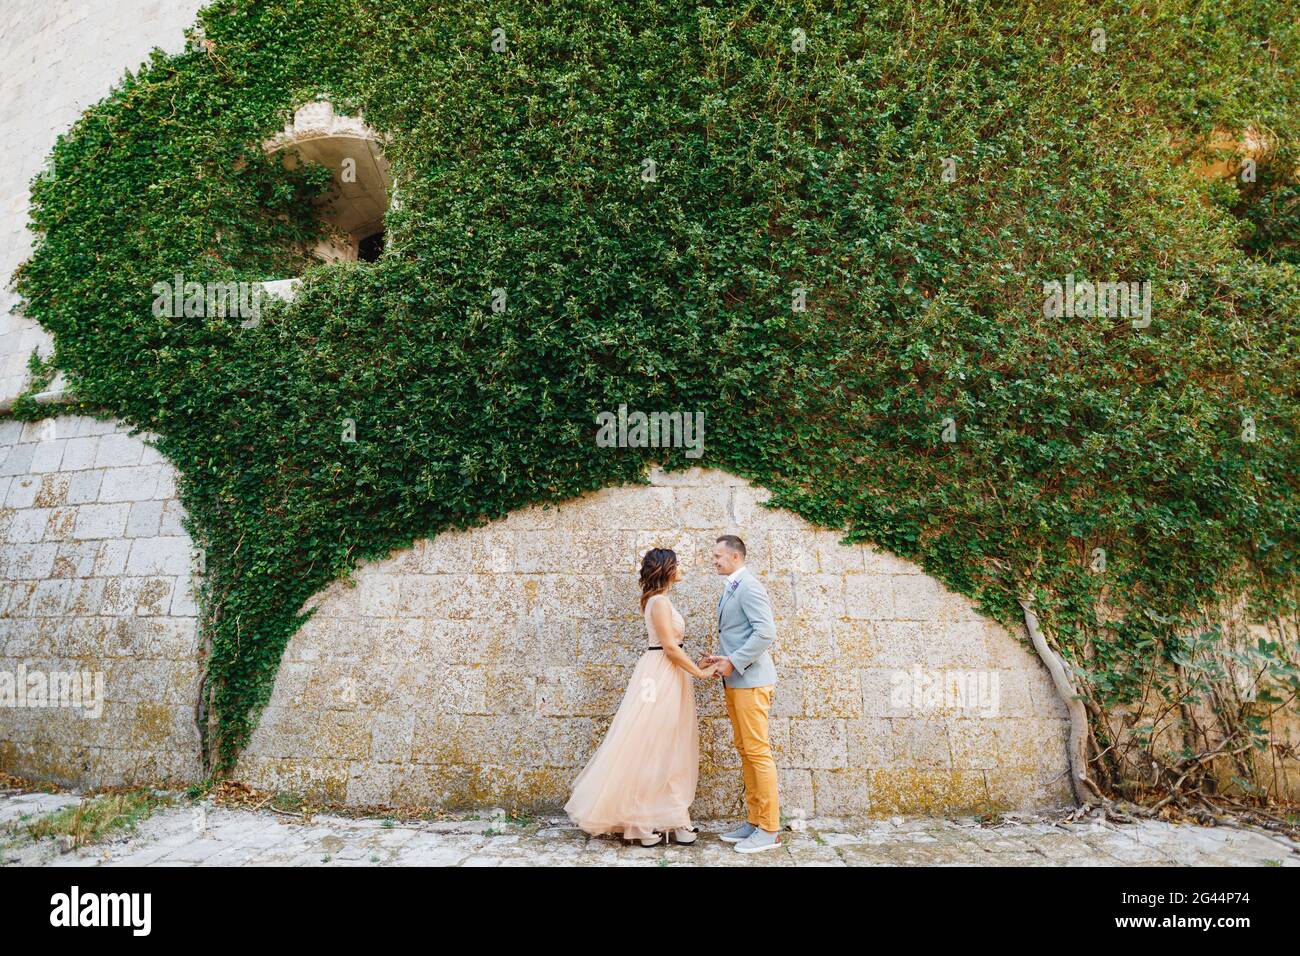 Beautiful newlyweds hold hands against the background of a stone wall entwined with gorgeous green ivy Stock Photo